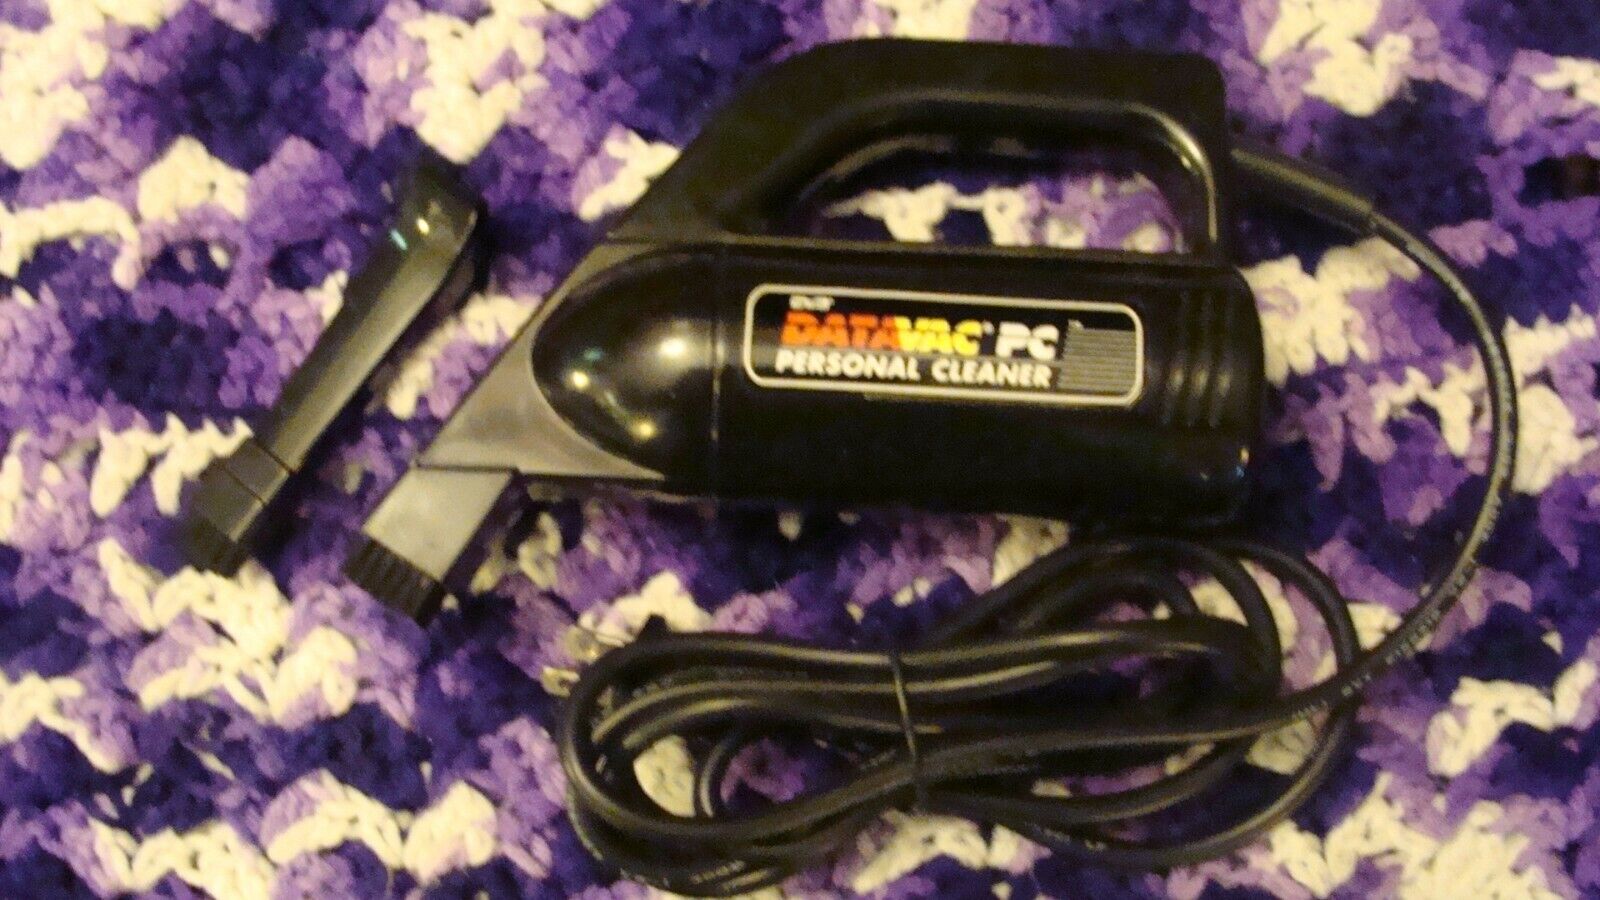 datavac pc personal vacuum cleaner model# ms-4 for pc/keyboards/etc.